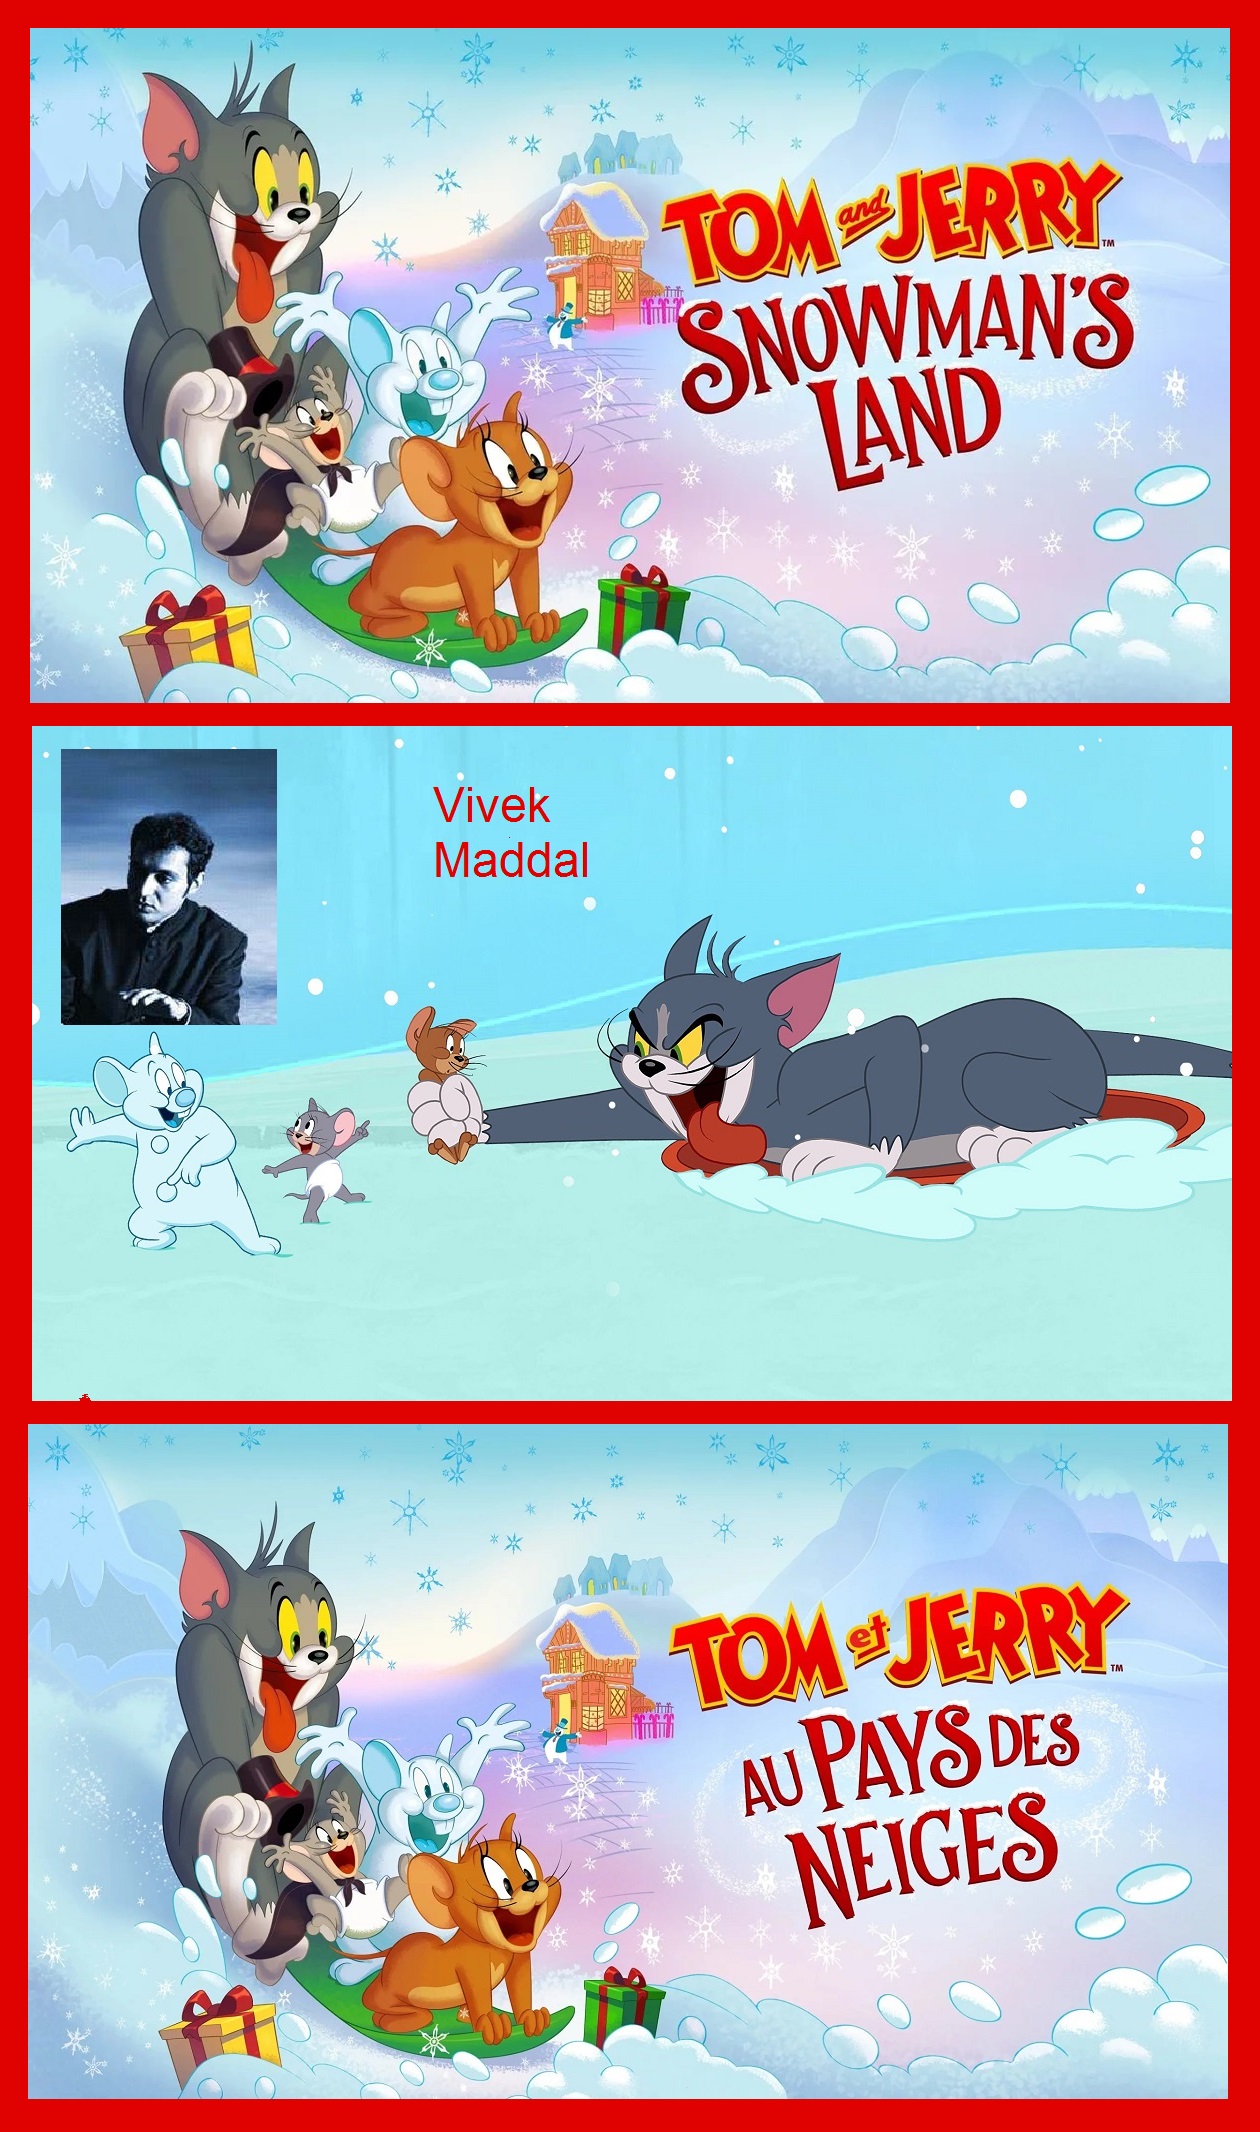 Tom and Jerry: Snowmans Land